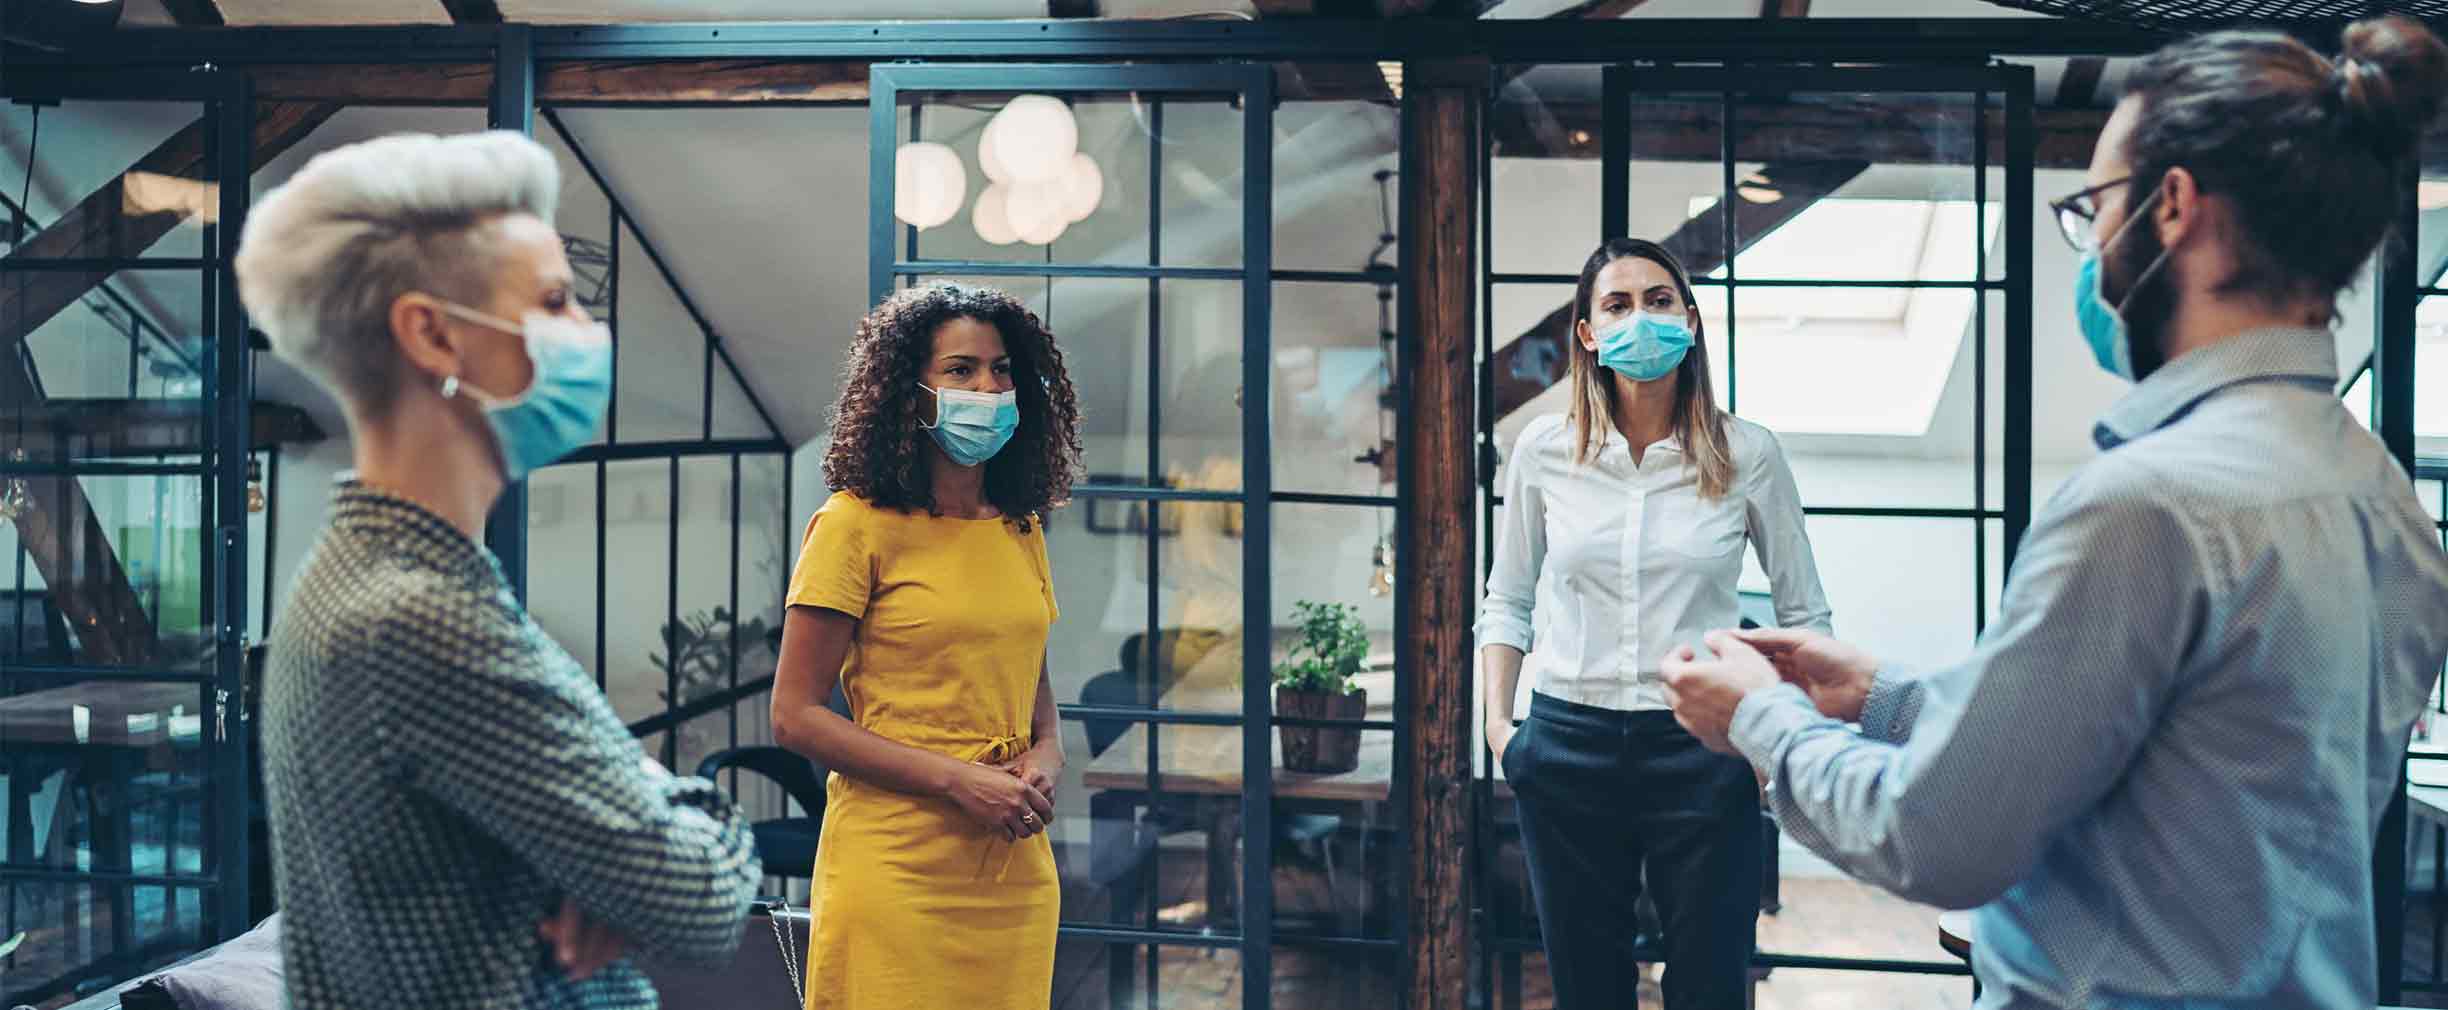 Business persons with protective masks meet in a co-working area